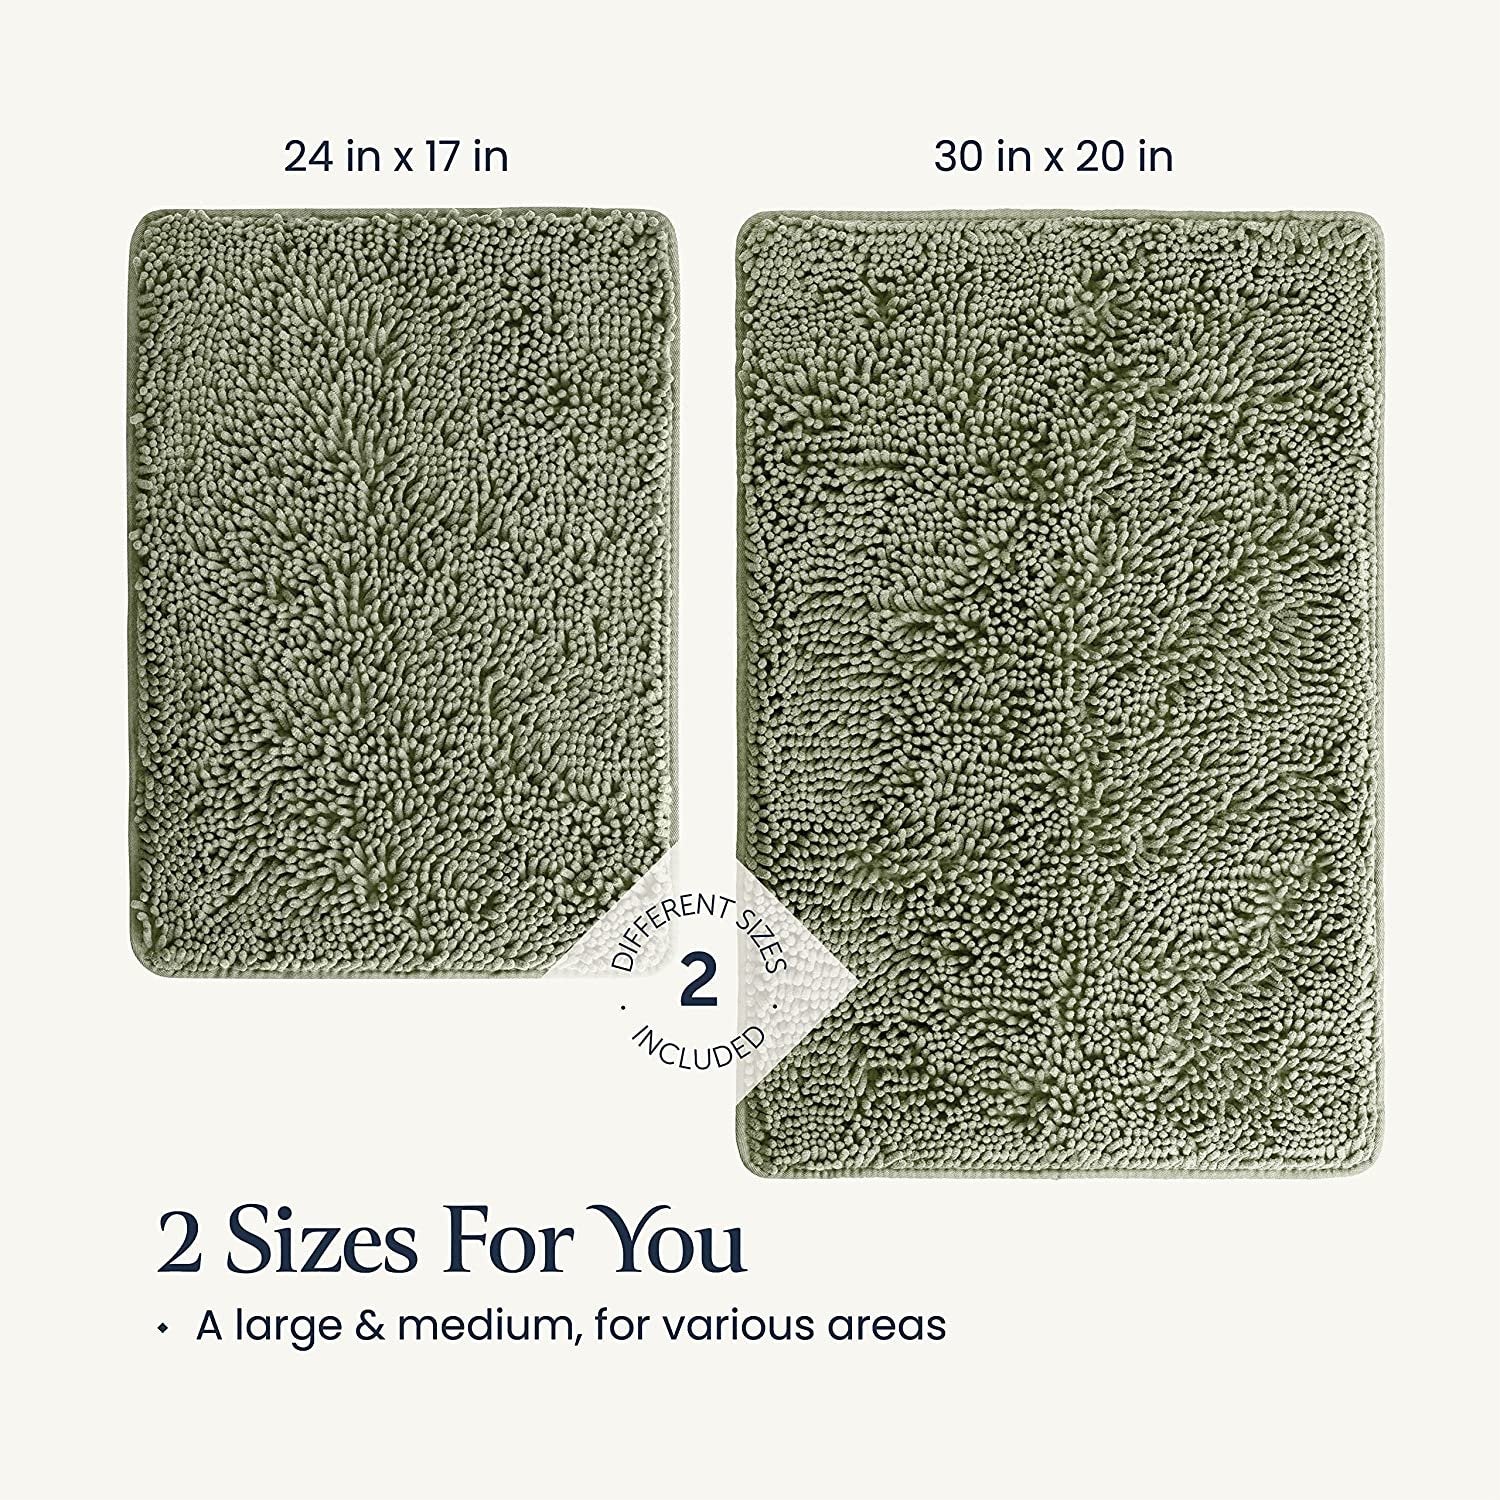 BELADOR Sage Green 2pc Bathroom Rug Set - Soft Plush Chenille Bath Mats, Durable with Rubber Backing, Ultra Absorbent, 30x20 + 24x17 Inch Size